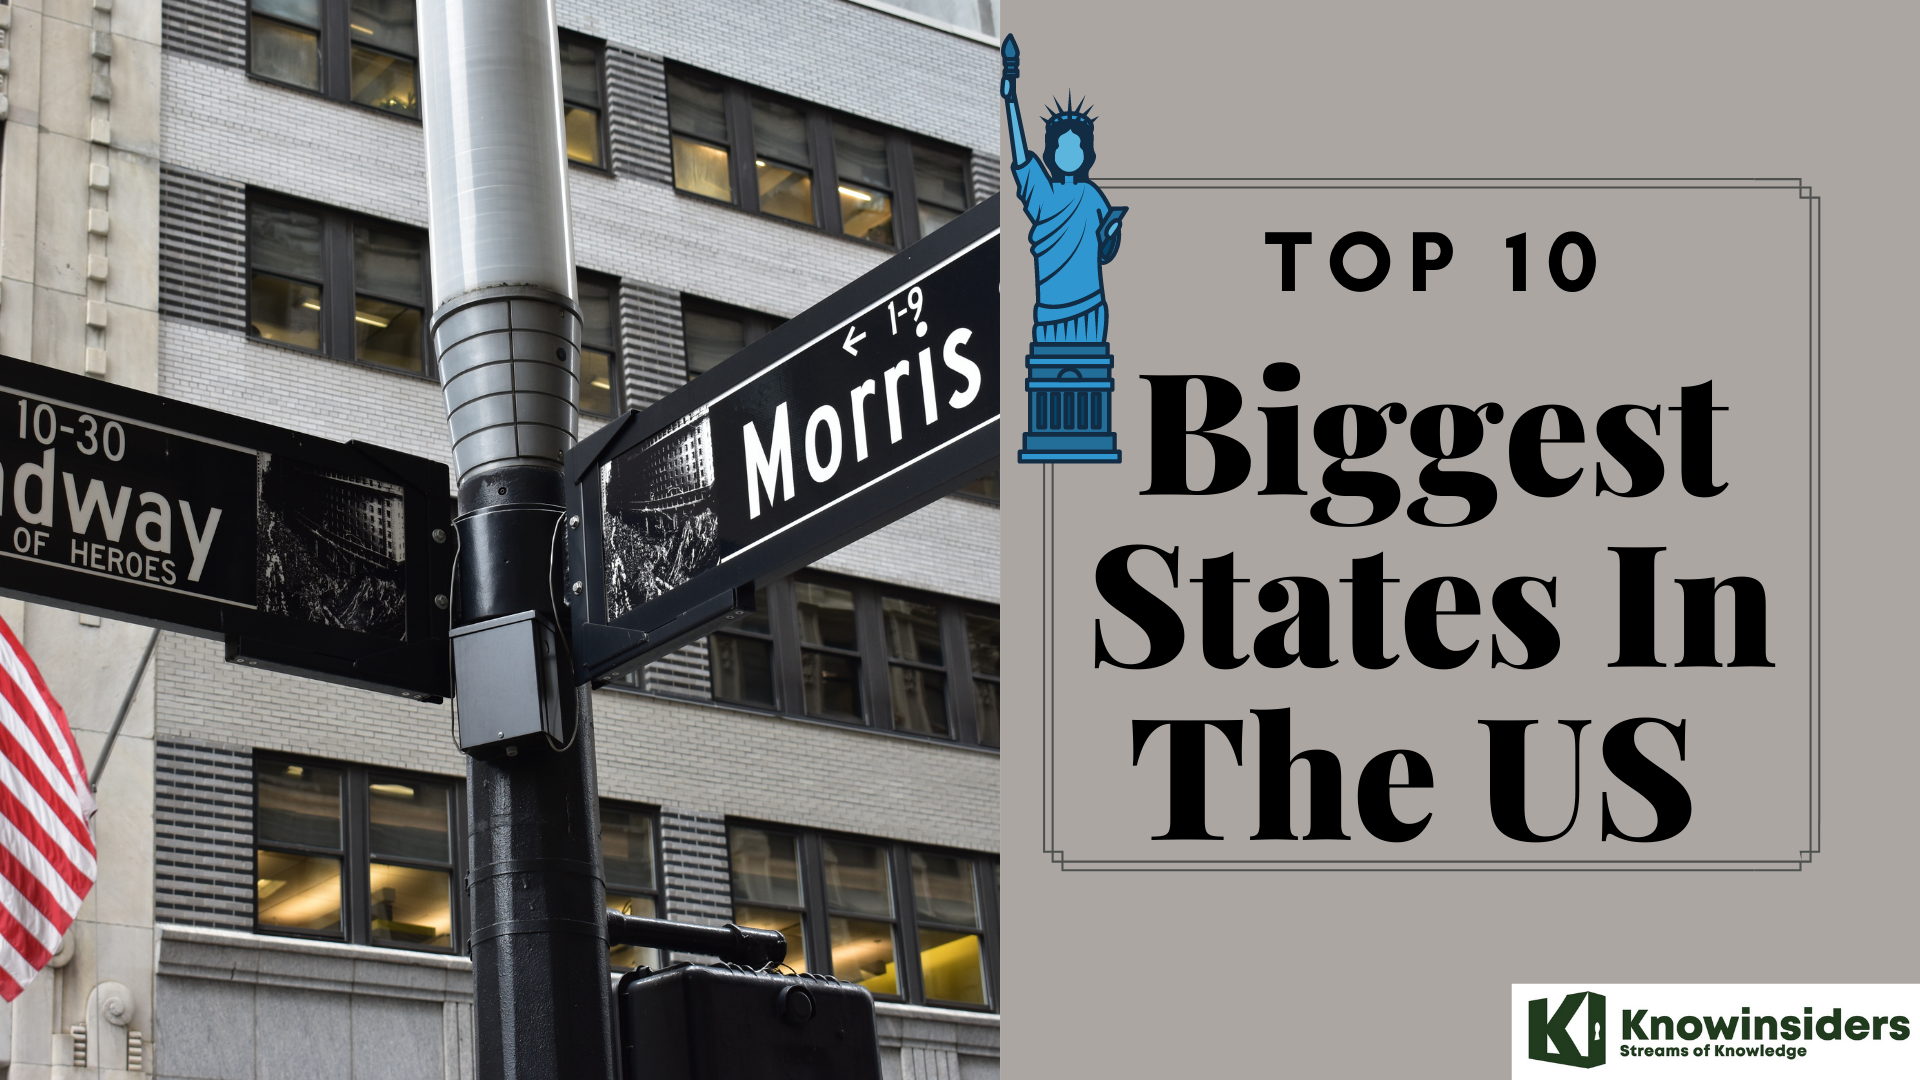 What Are The Biggest States In The US - Top 10 By Population and by Size